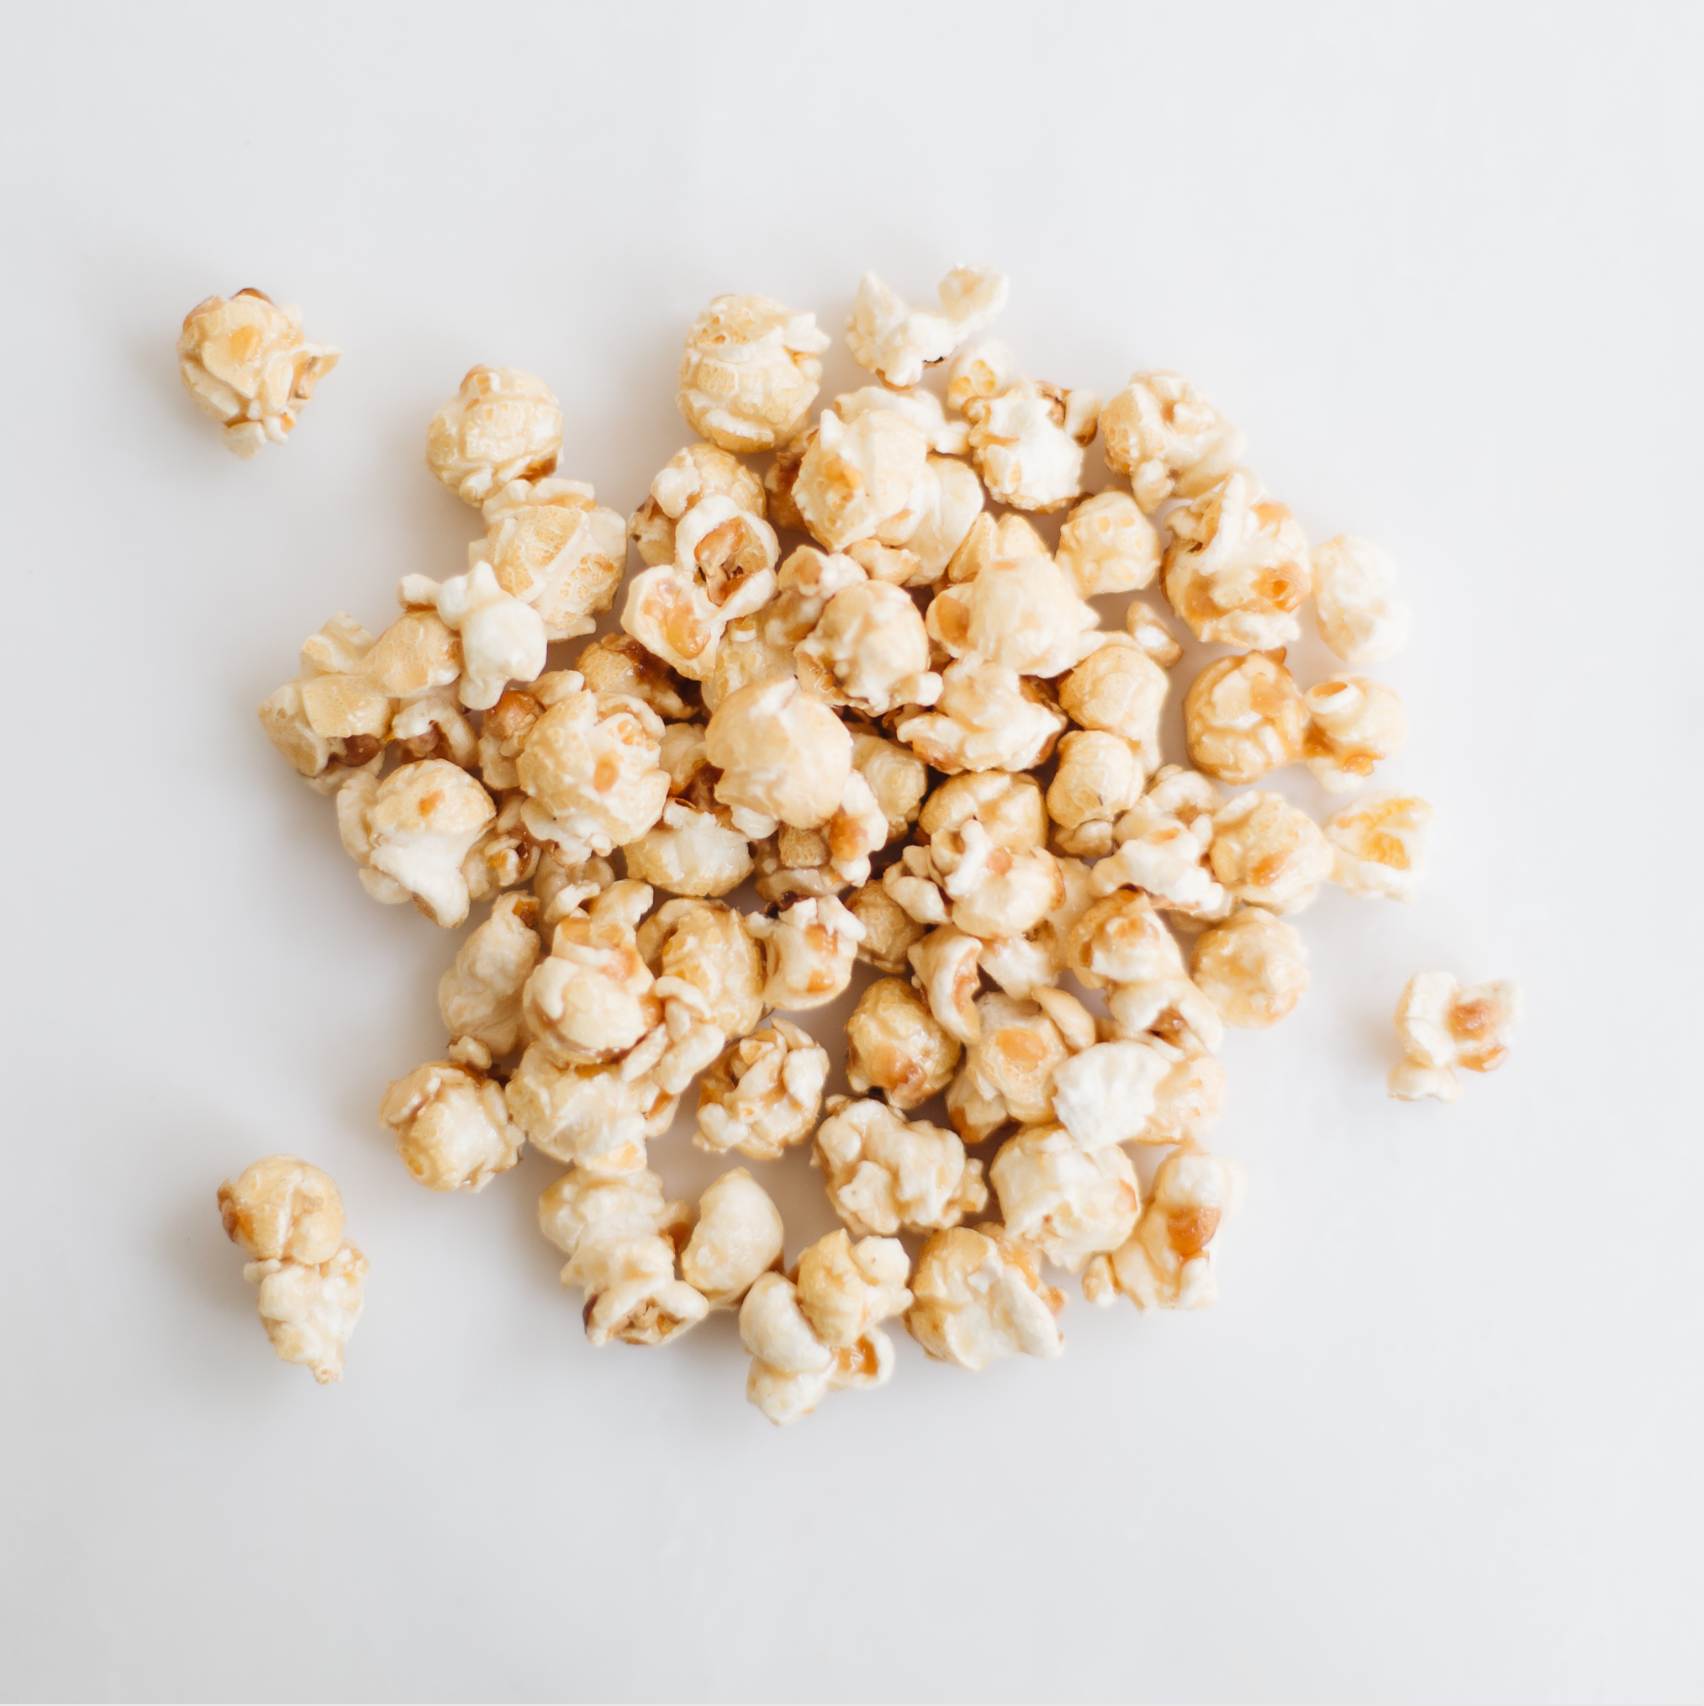 Sweet, Crunchy, and buttery caramel popcorn is the perfect snack to have around the house. Order it now online or stop in our shop to get a bag of this classic gourmet popcorn. 